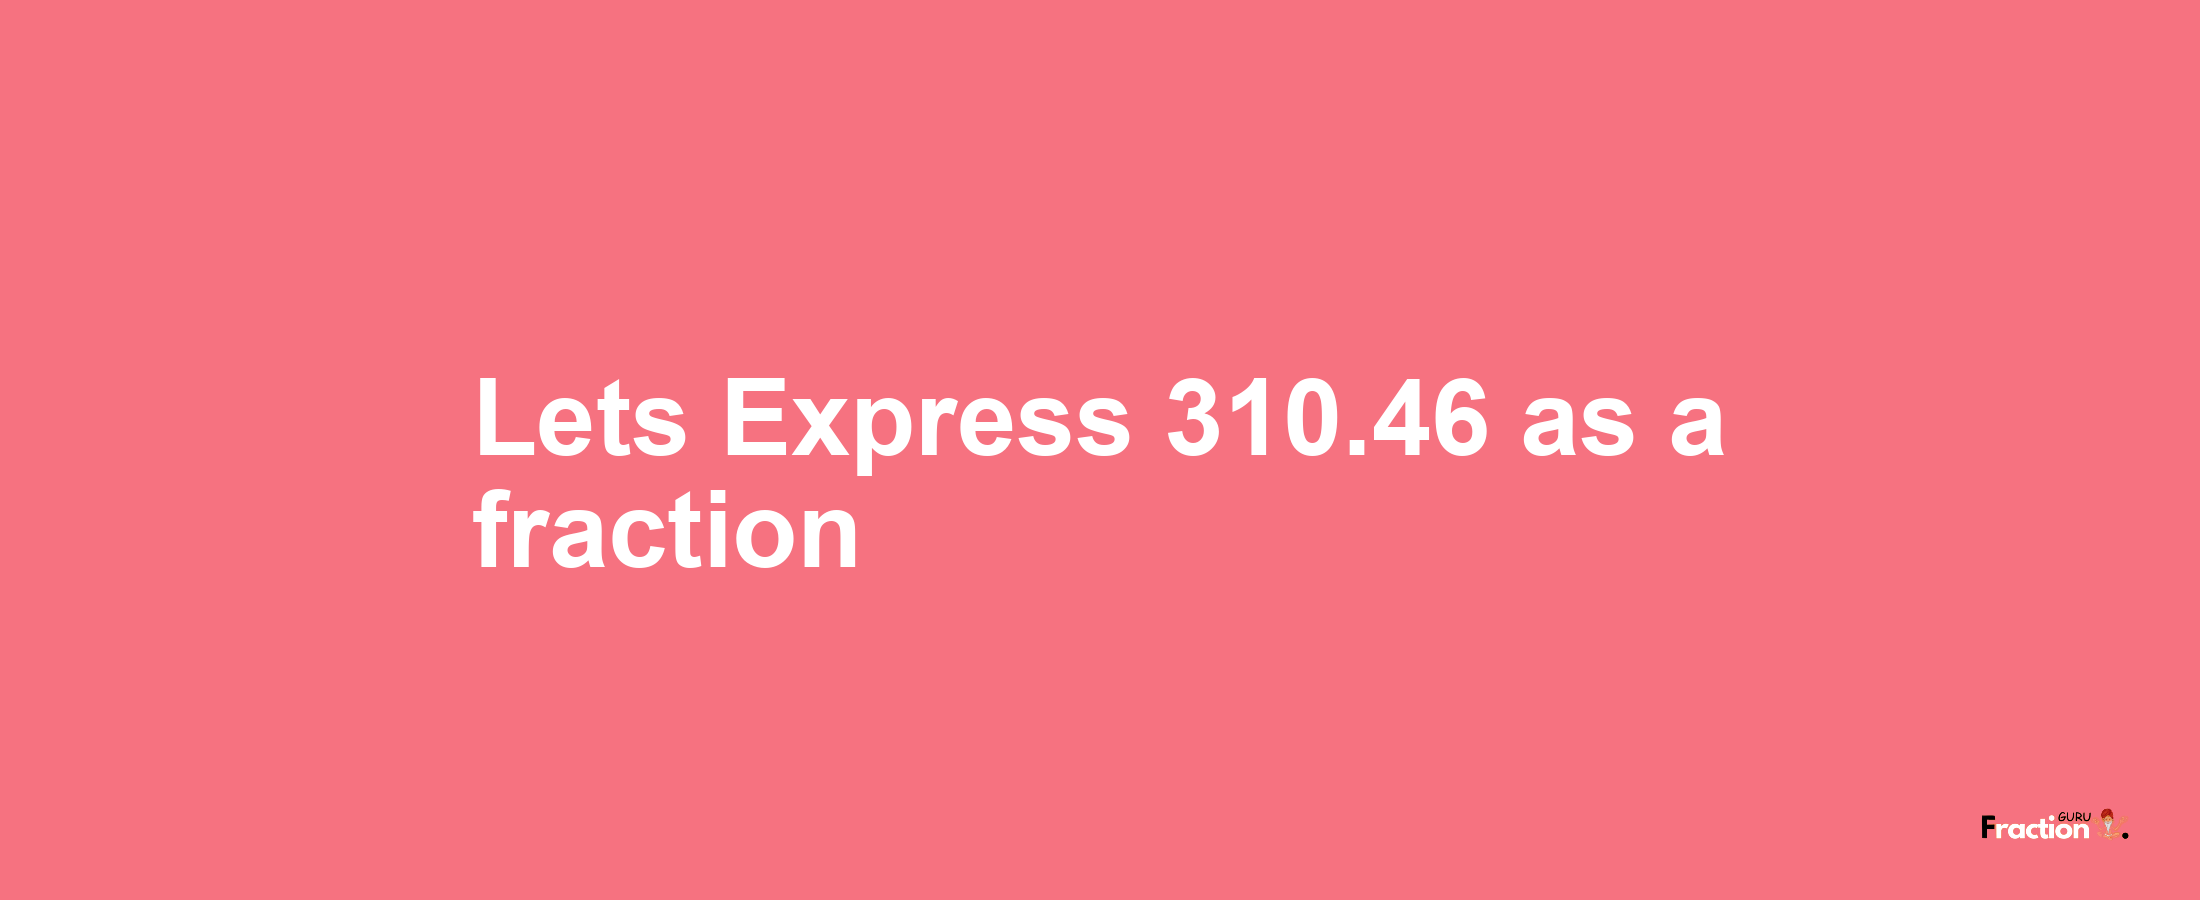 Lets Express 310.46 as afraction